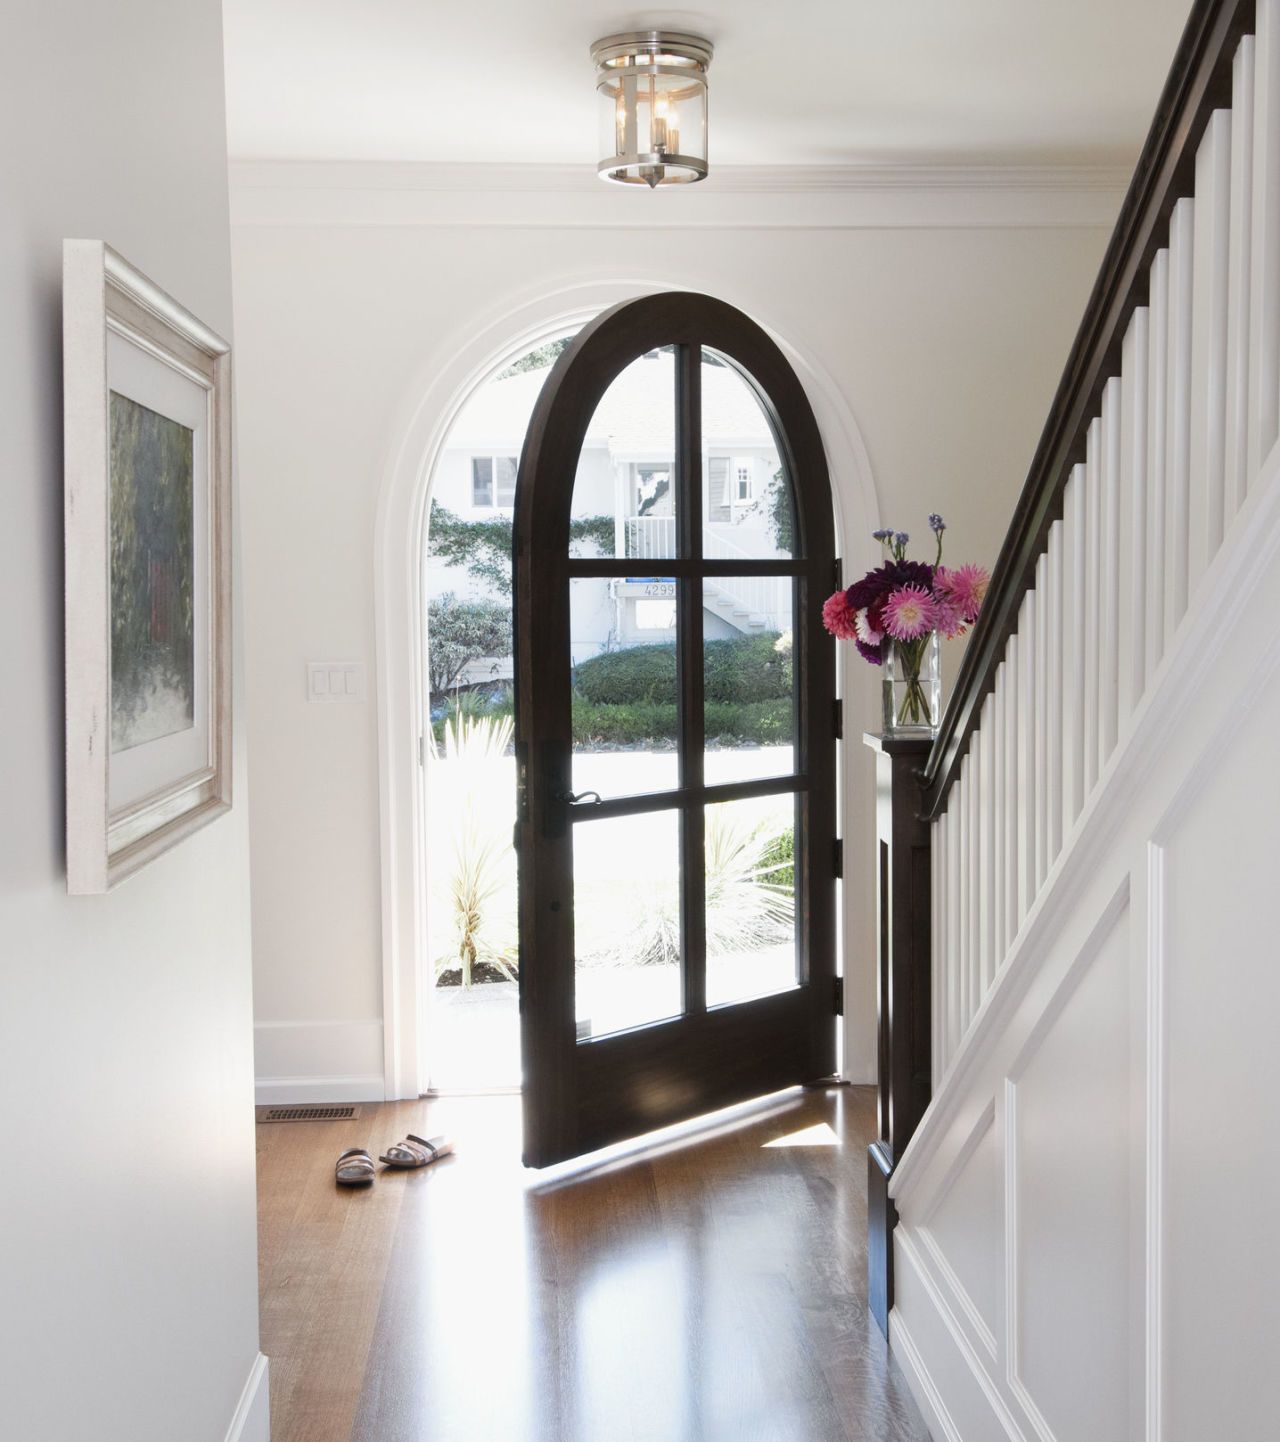 An Arched Doorway Opens To Hallway